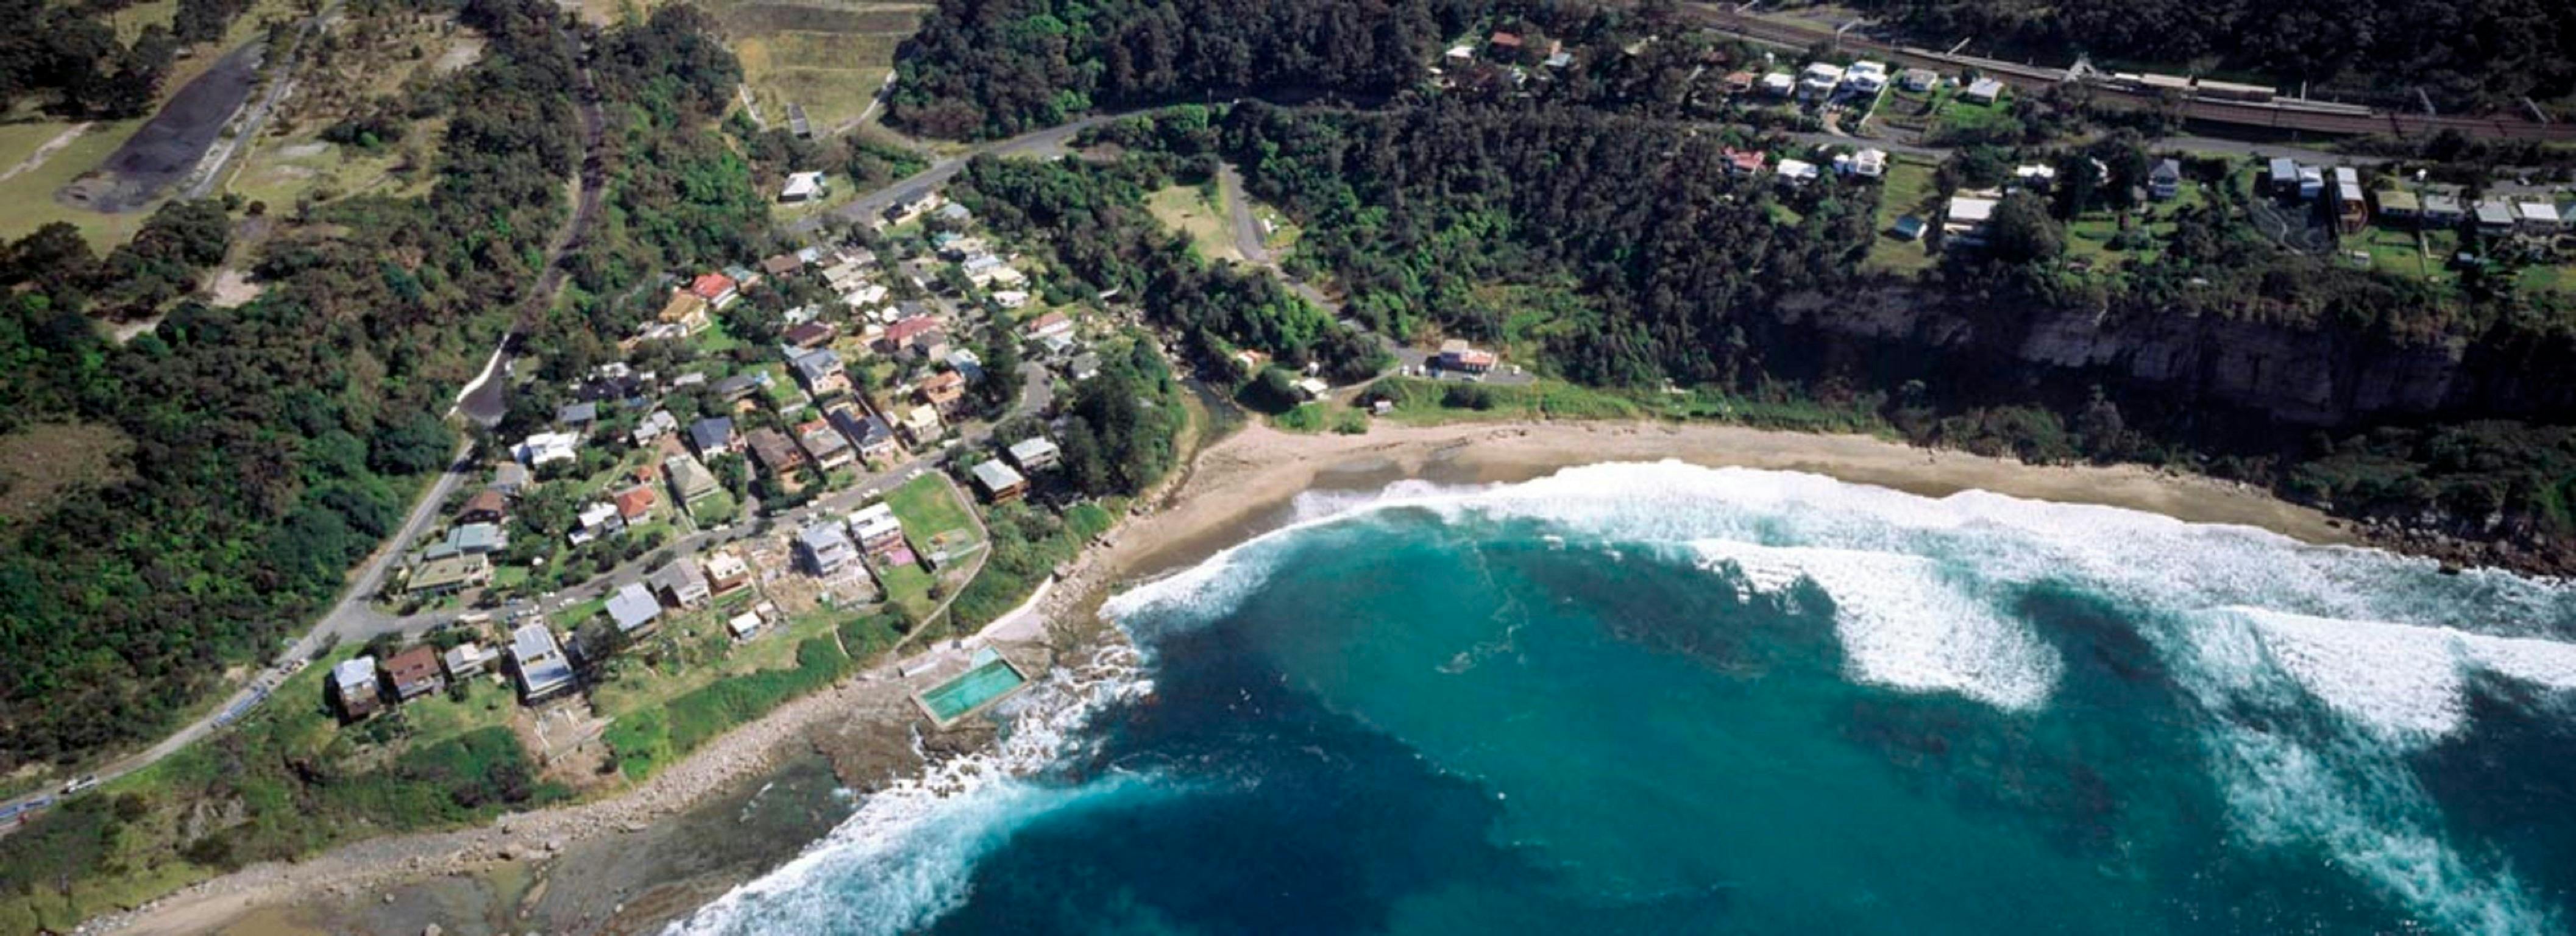 Coalcliff | NSW Holidays & Accommodation, Things to Do, Attractions and